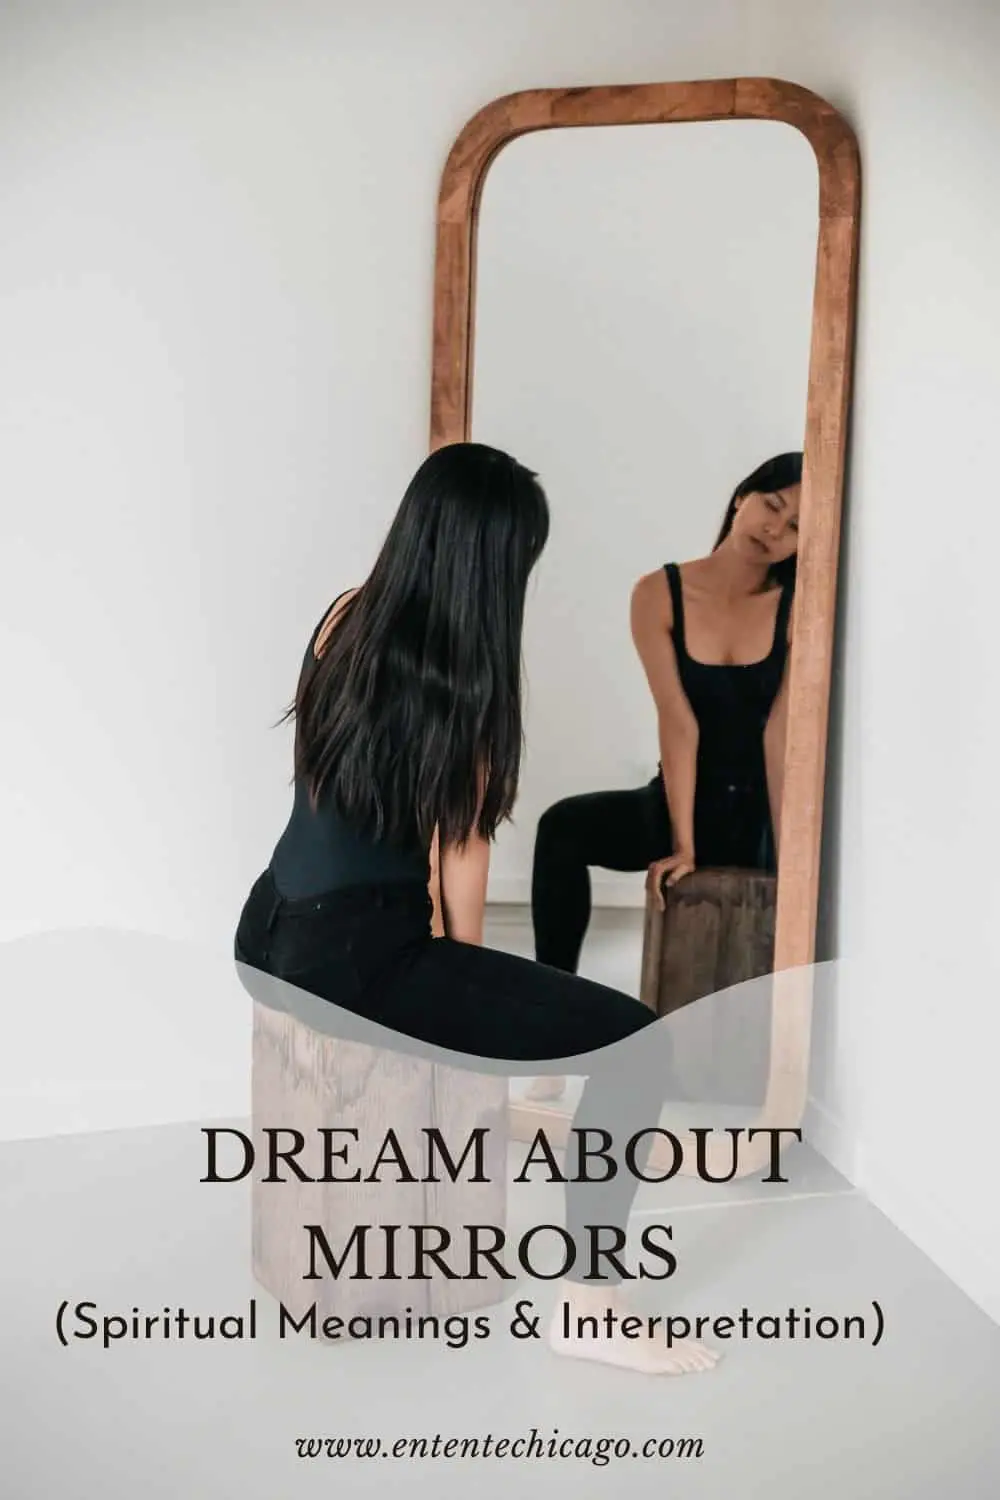 What Do Mirrors Symbolize In Dreams?